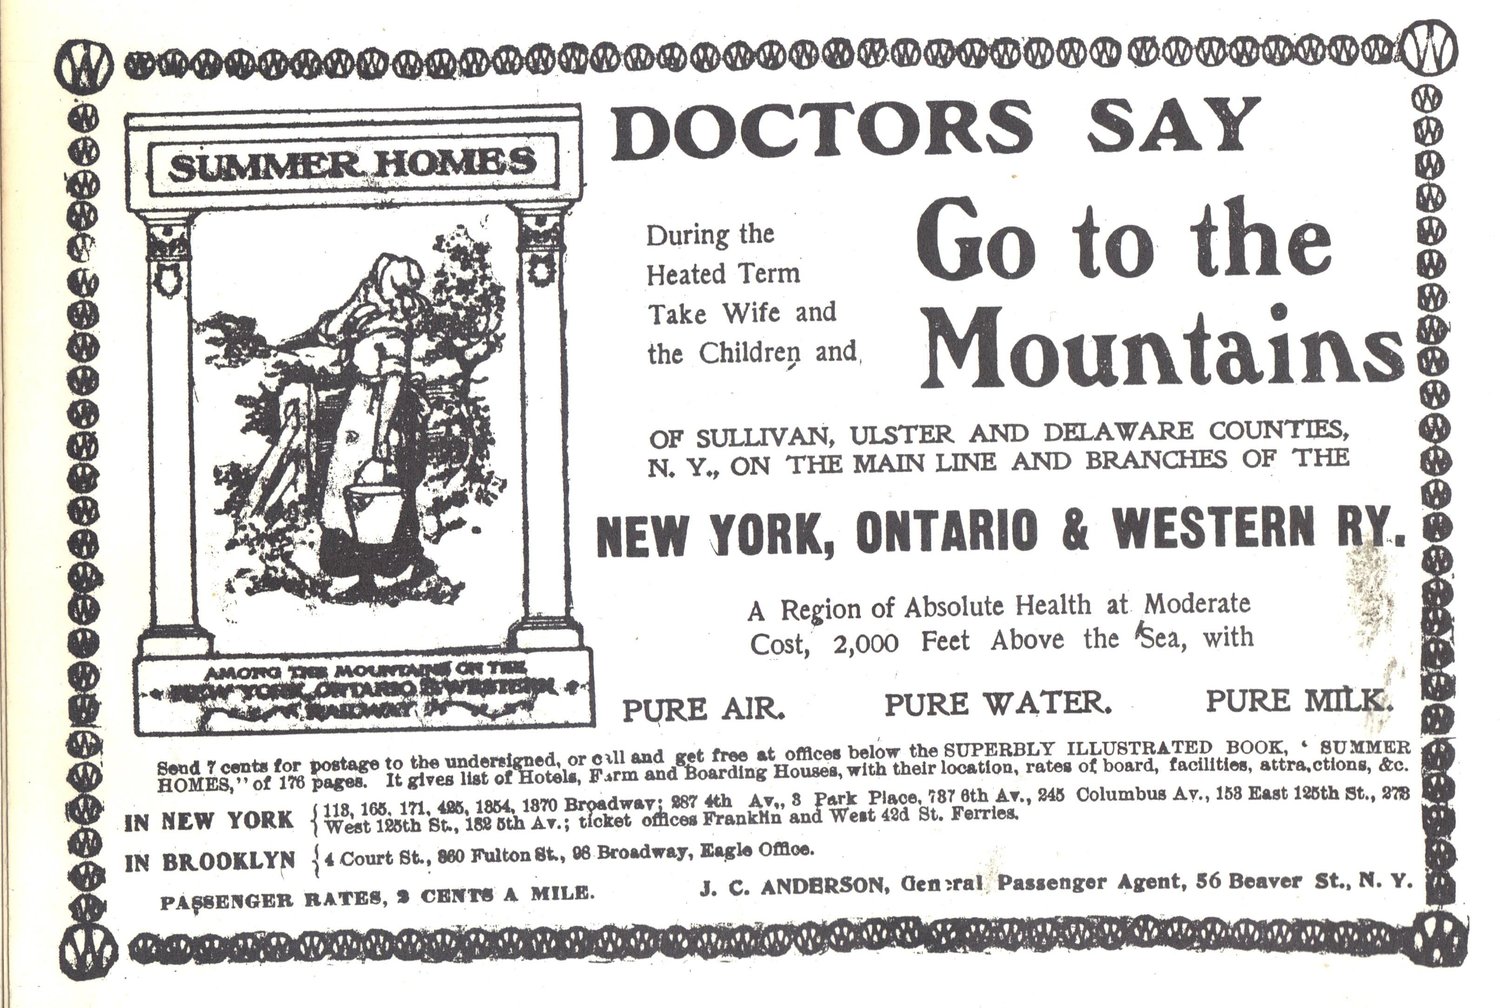 “Doctors say, ‘Go to the mountains!’” Our clean air and water were seen as both curing and protective, which would fit right in with Eclectic philosophy/image from John Conway’s personal collection.